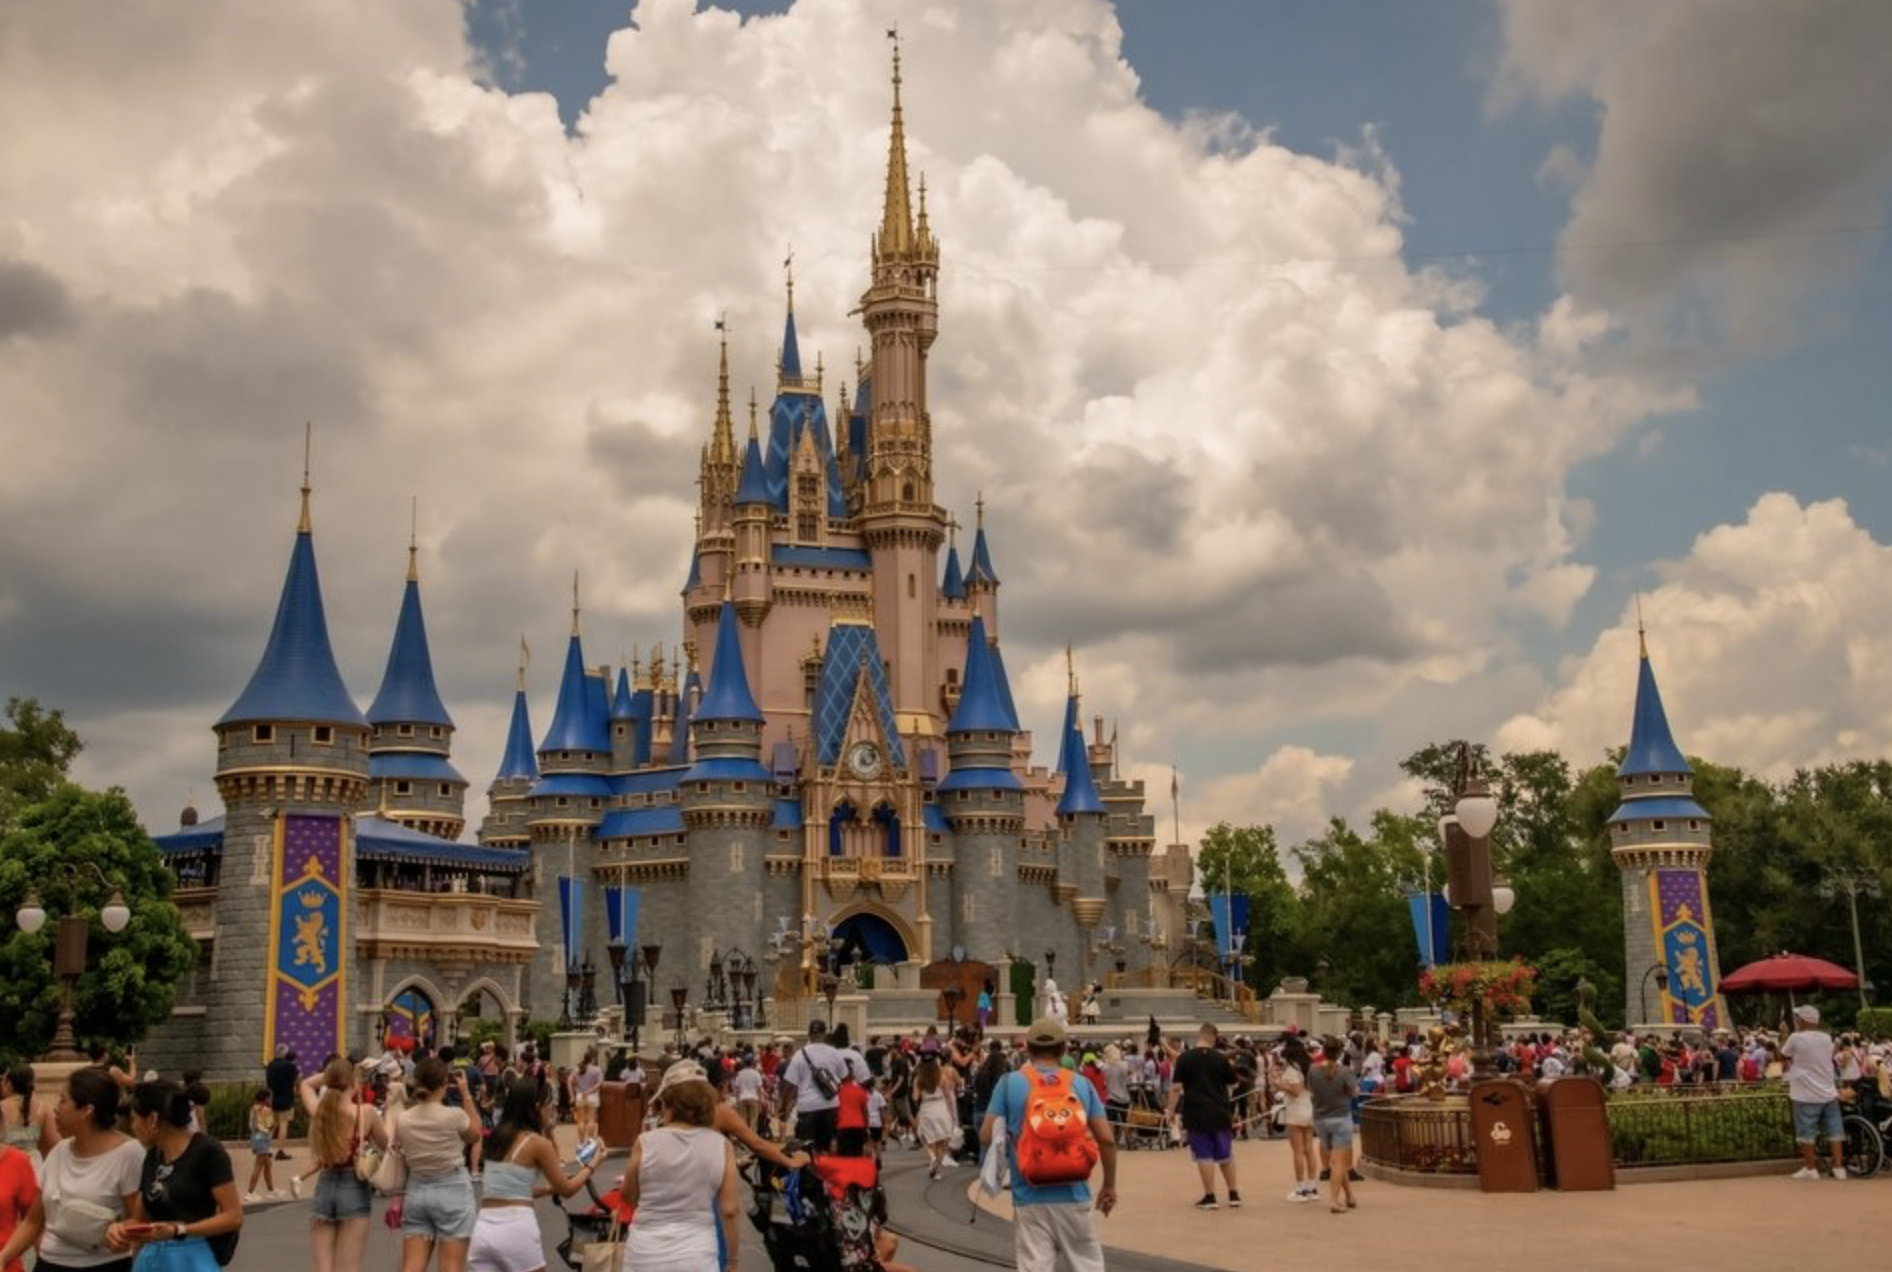 Let a Disney Travel Advisor Plan the Perfect Disney World Vacation Just for You